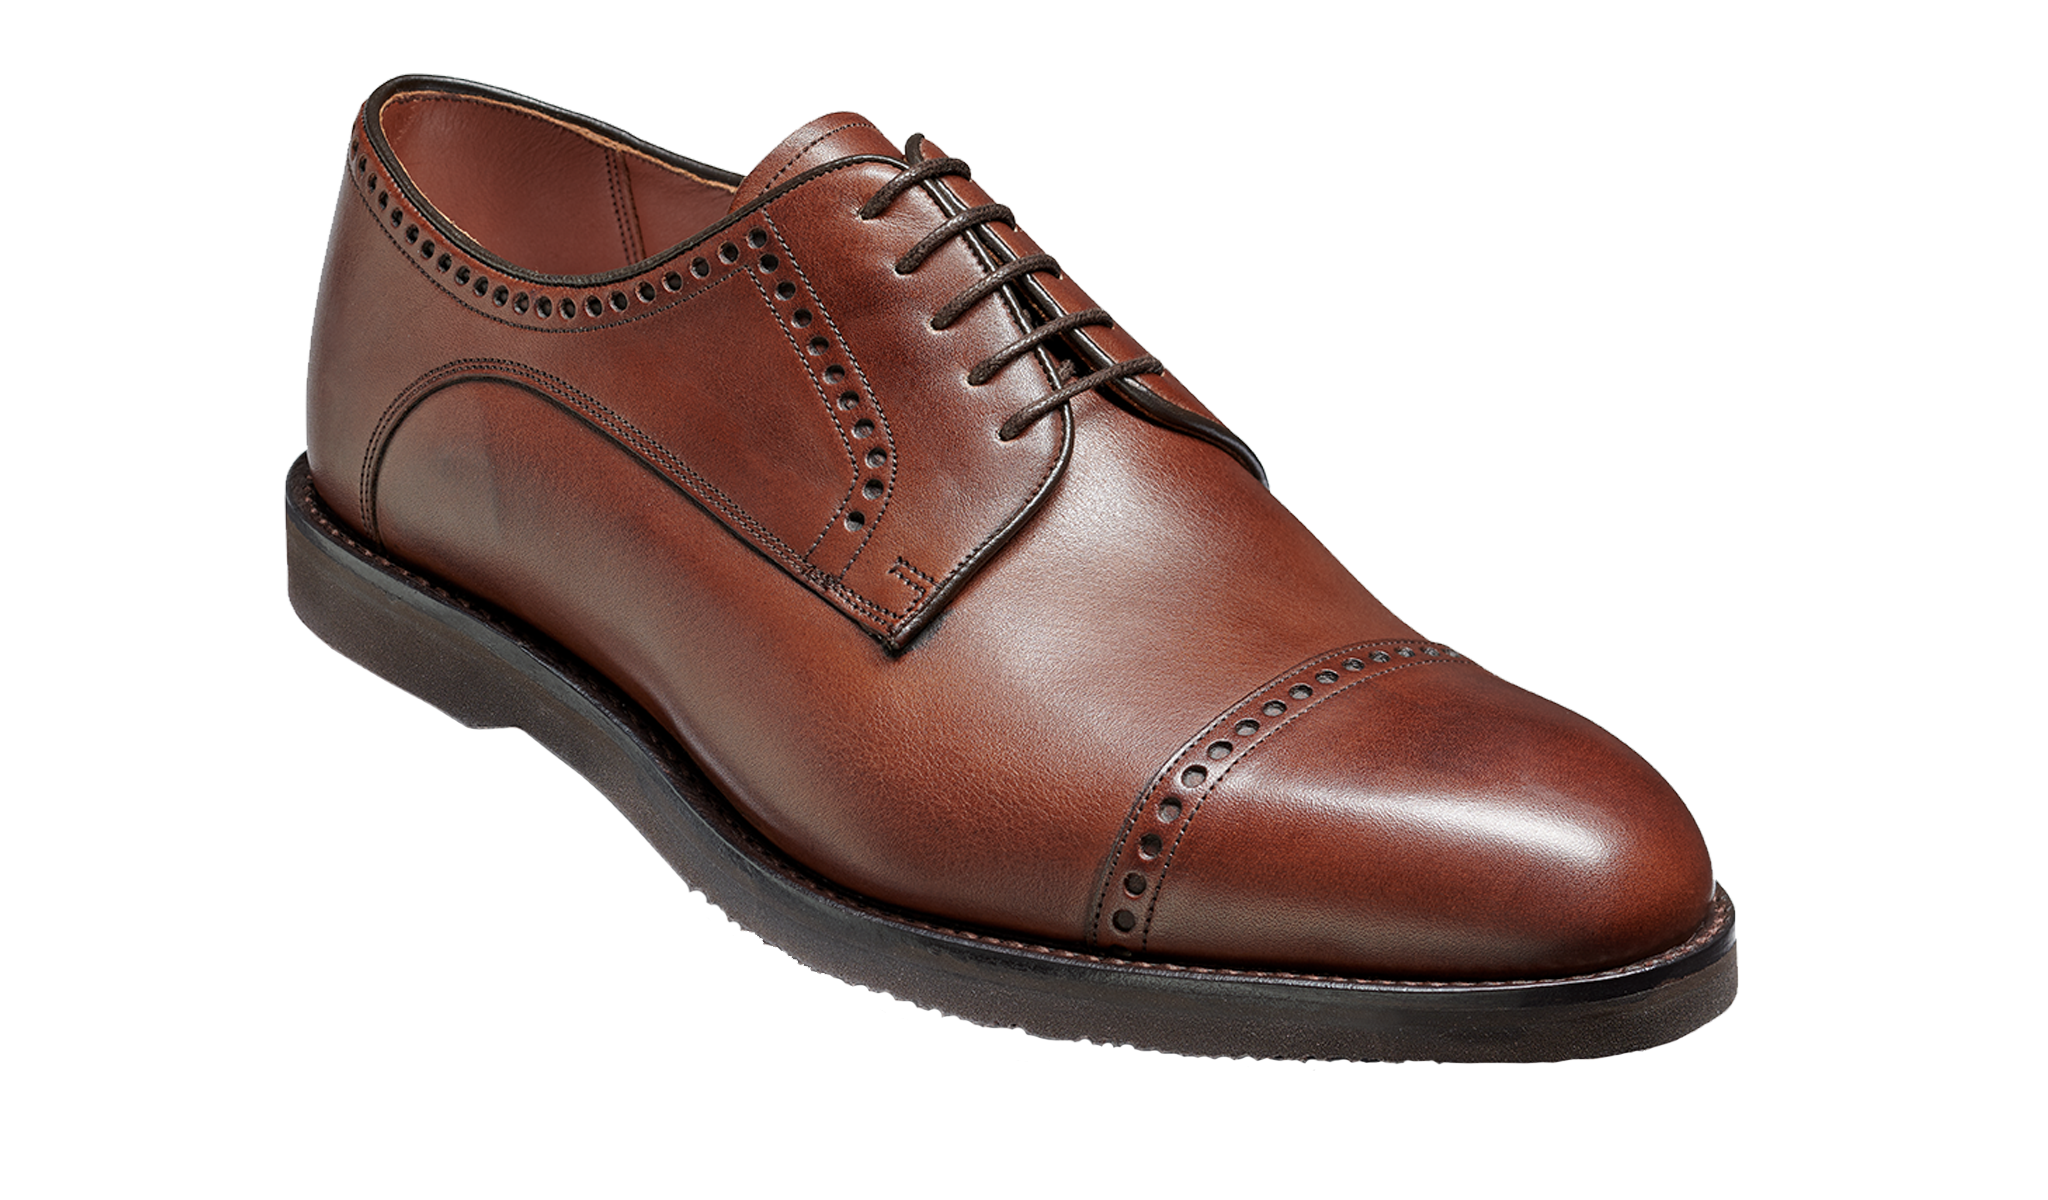 Marcus - Men's Handmade Brown Leather Brogue Derby From Barker